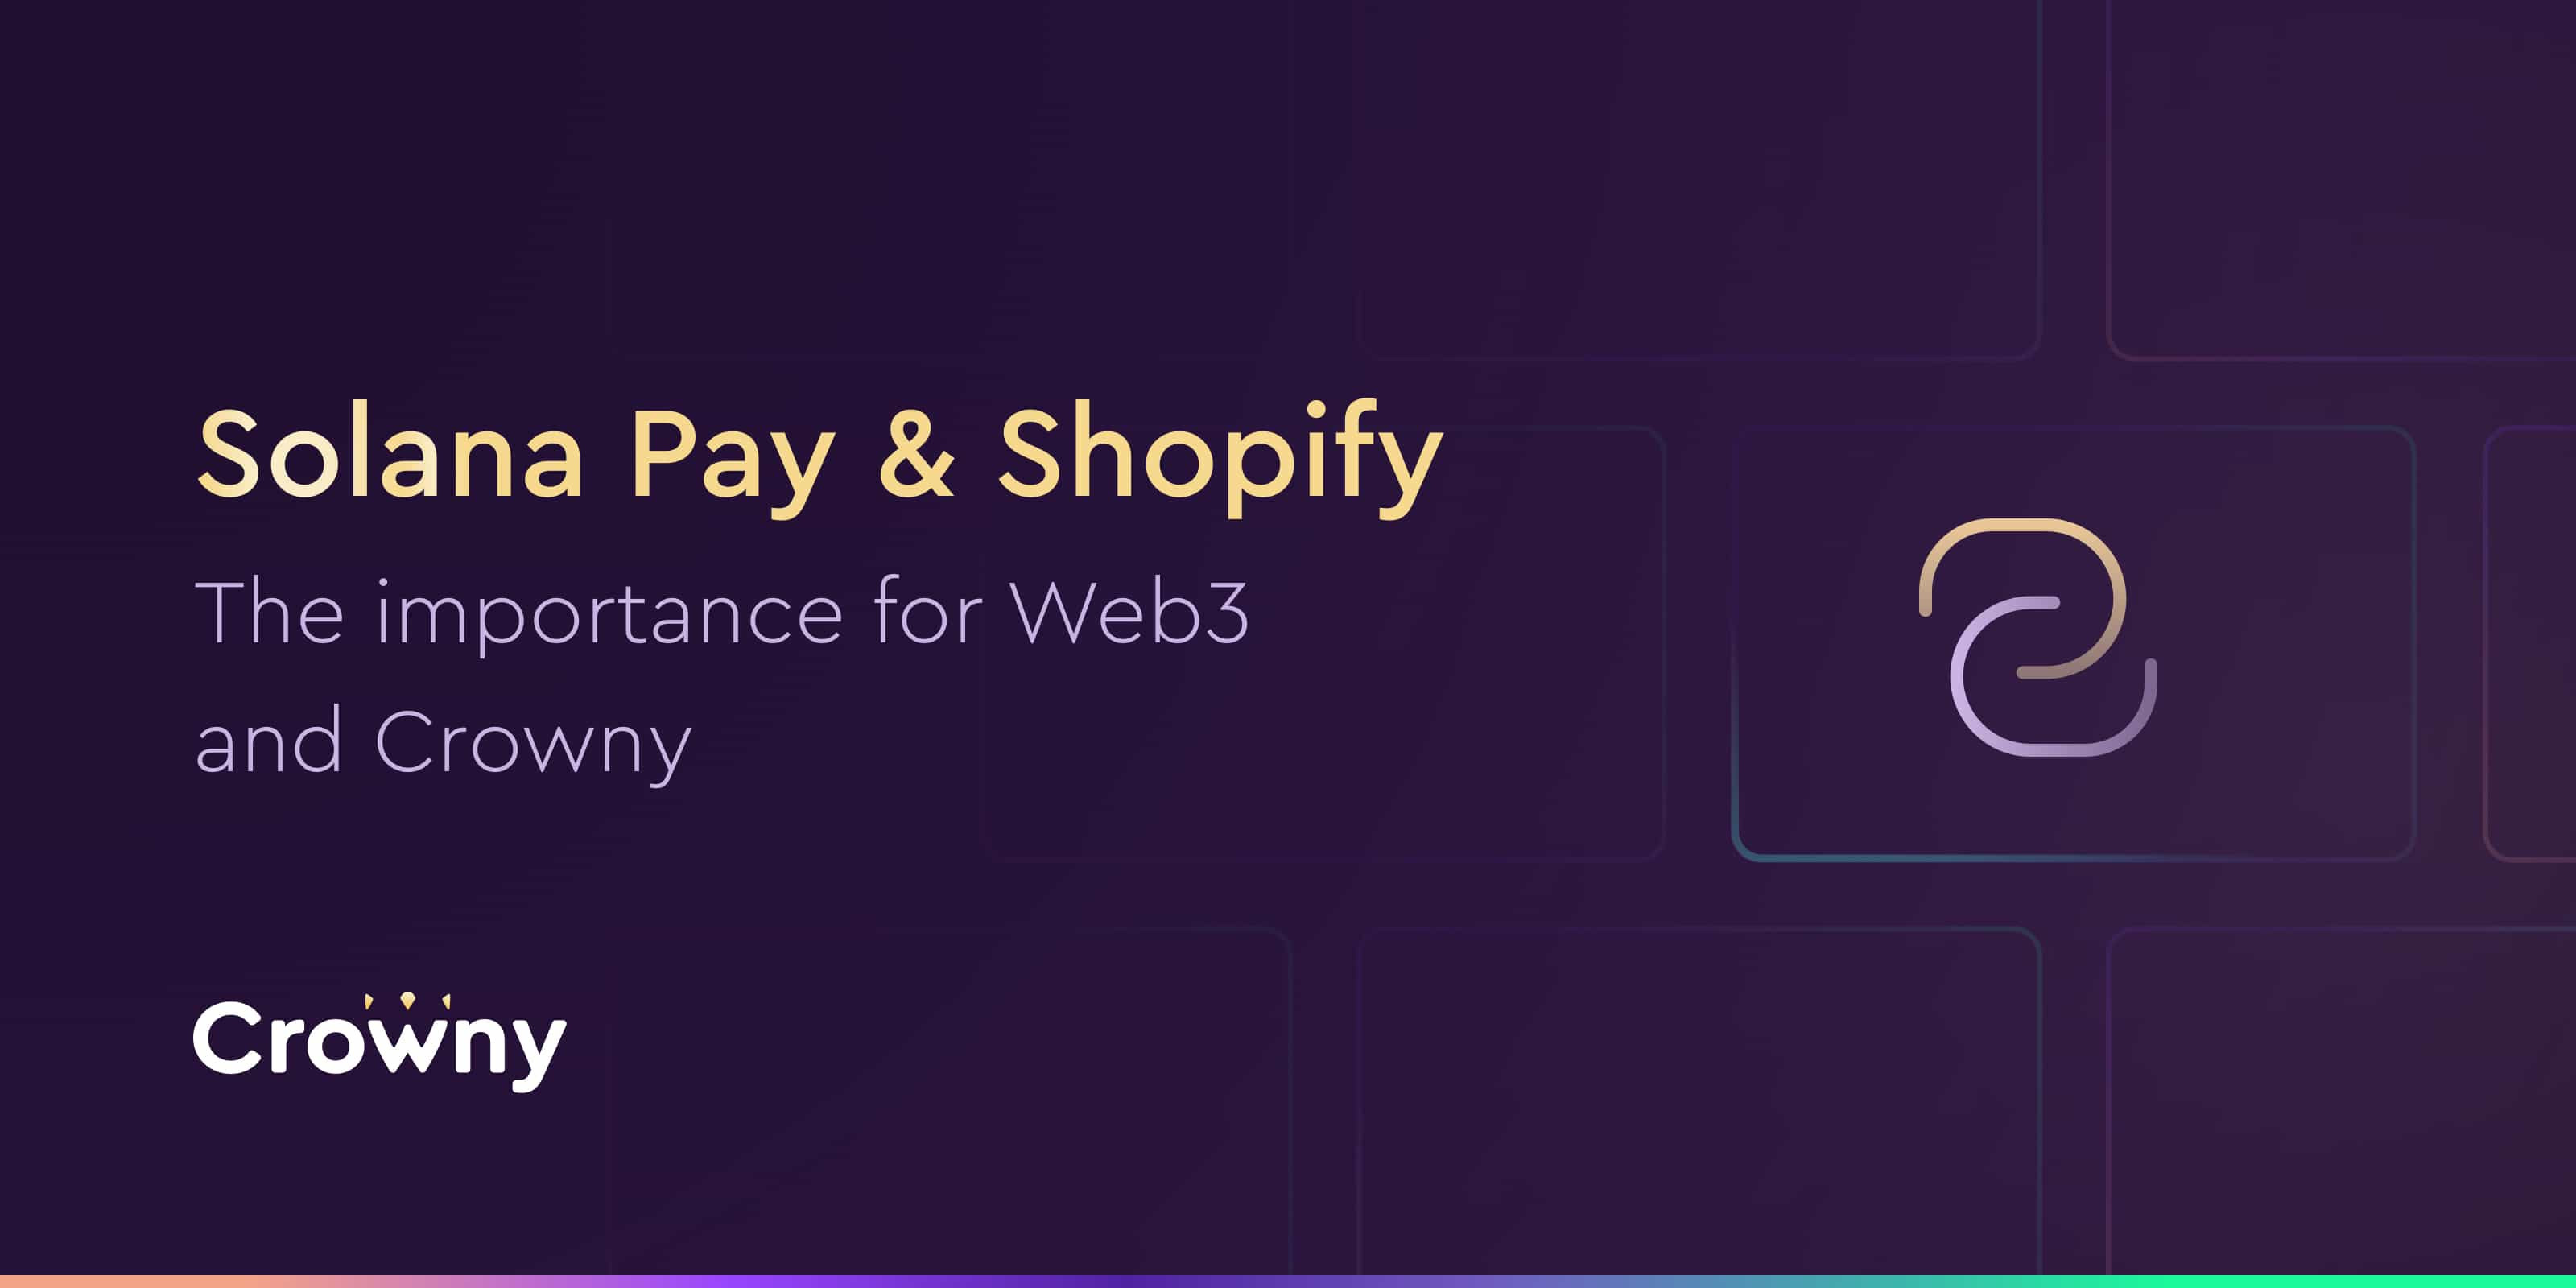 Solana Pay & Shopify - the importance for Web3 and Crowny